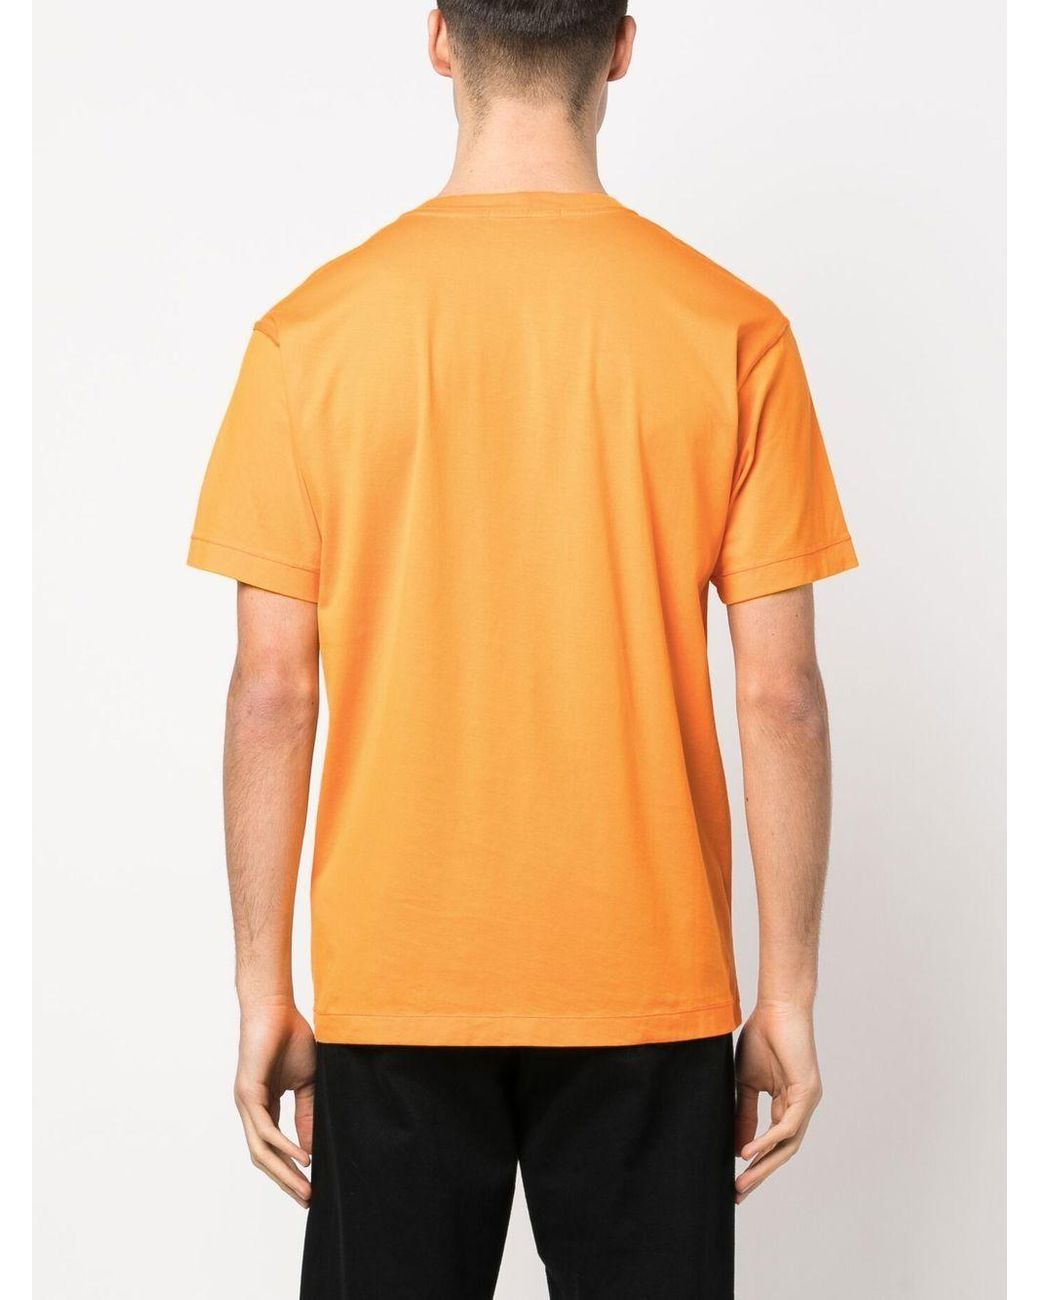 Stone Island Compass-patch Cotton T-shirt in Orange for Men | Lyst Canada